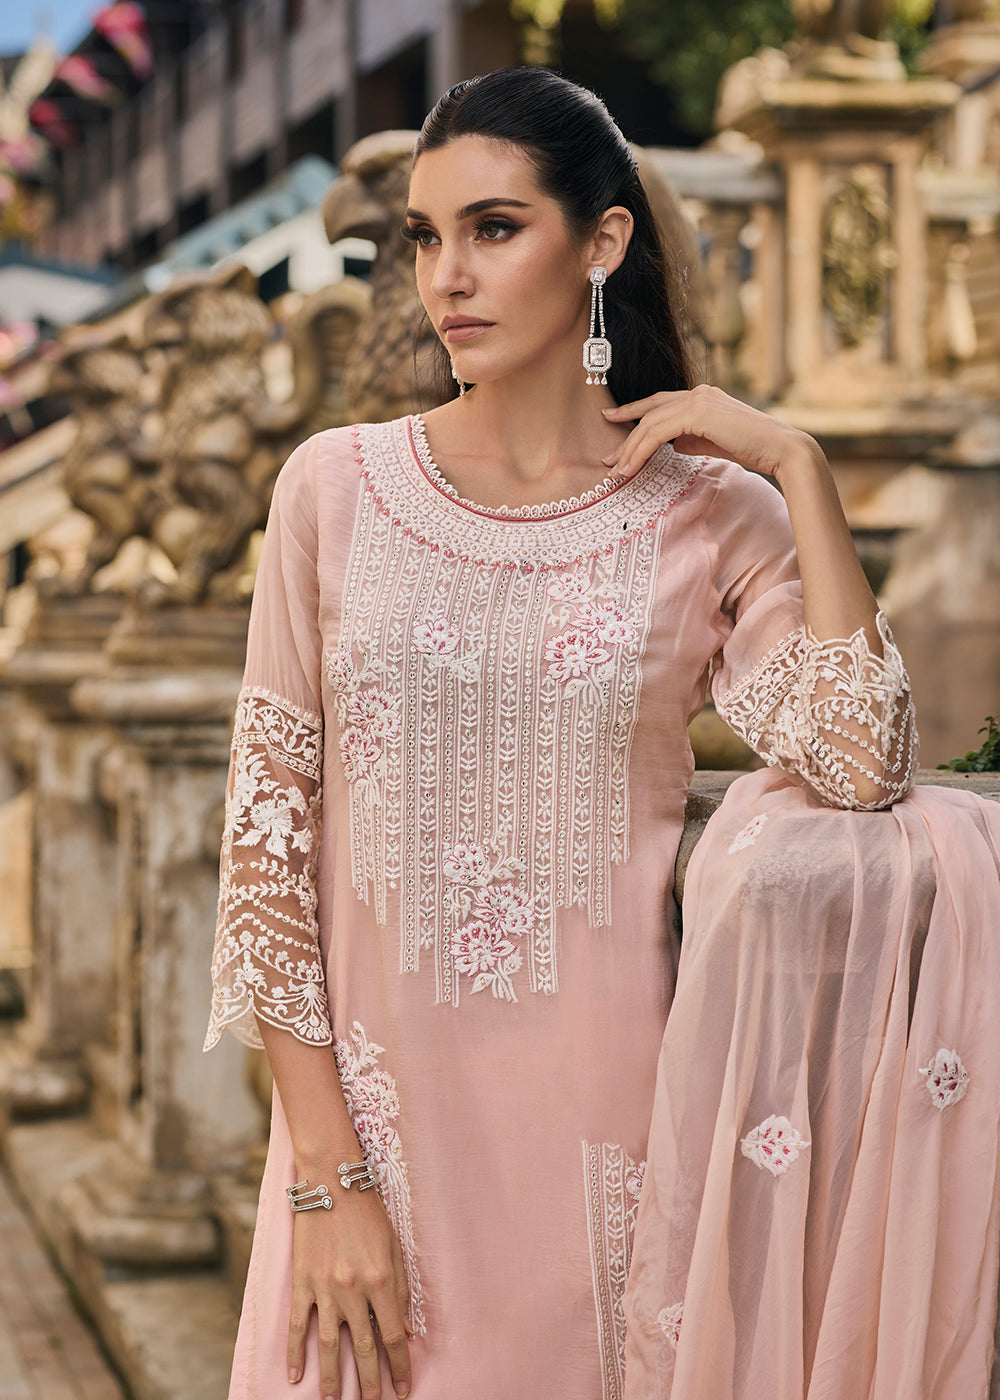 Buy Now Peach Soft Organza Embroidered Designer Salwar Suit Online in USA, UK, Canada, Germany, Australia & Worldwide at Empress Clothing.